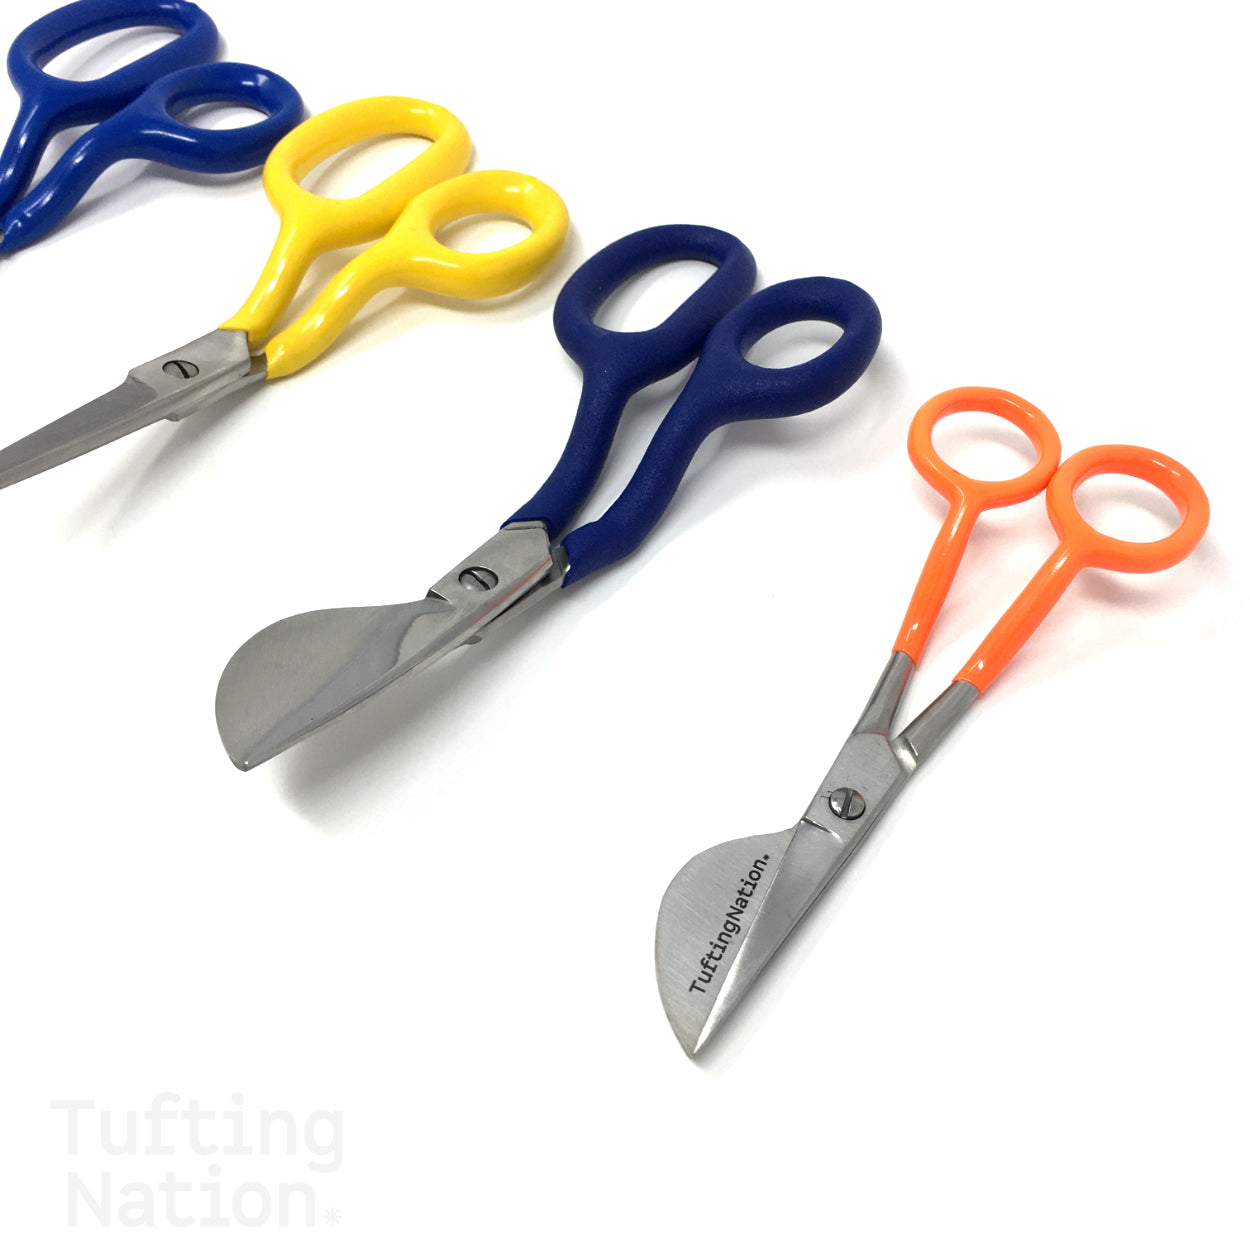 Bundle of 4 Carpet Scissors. | Two Duckbill Scissors and Two Napping Shears. | TuftingNation Canada